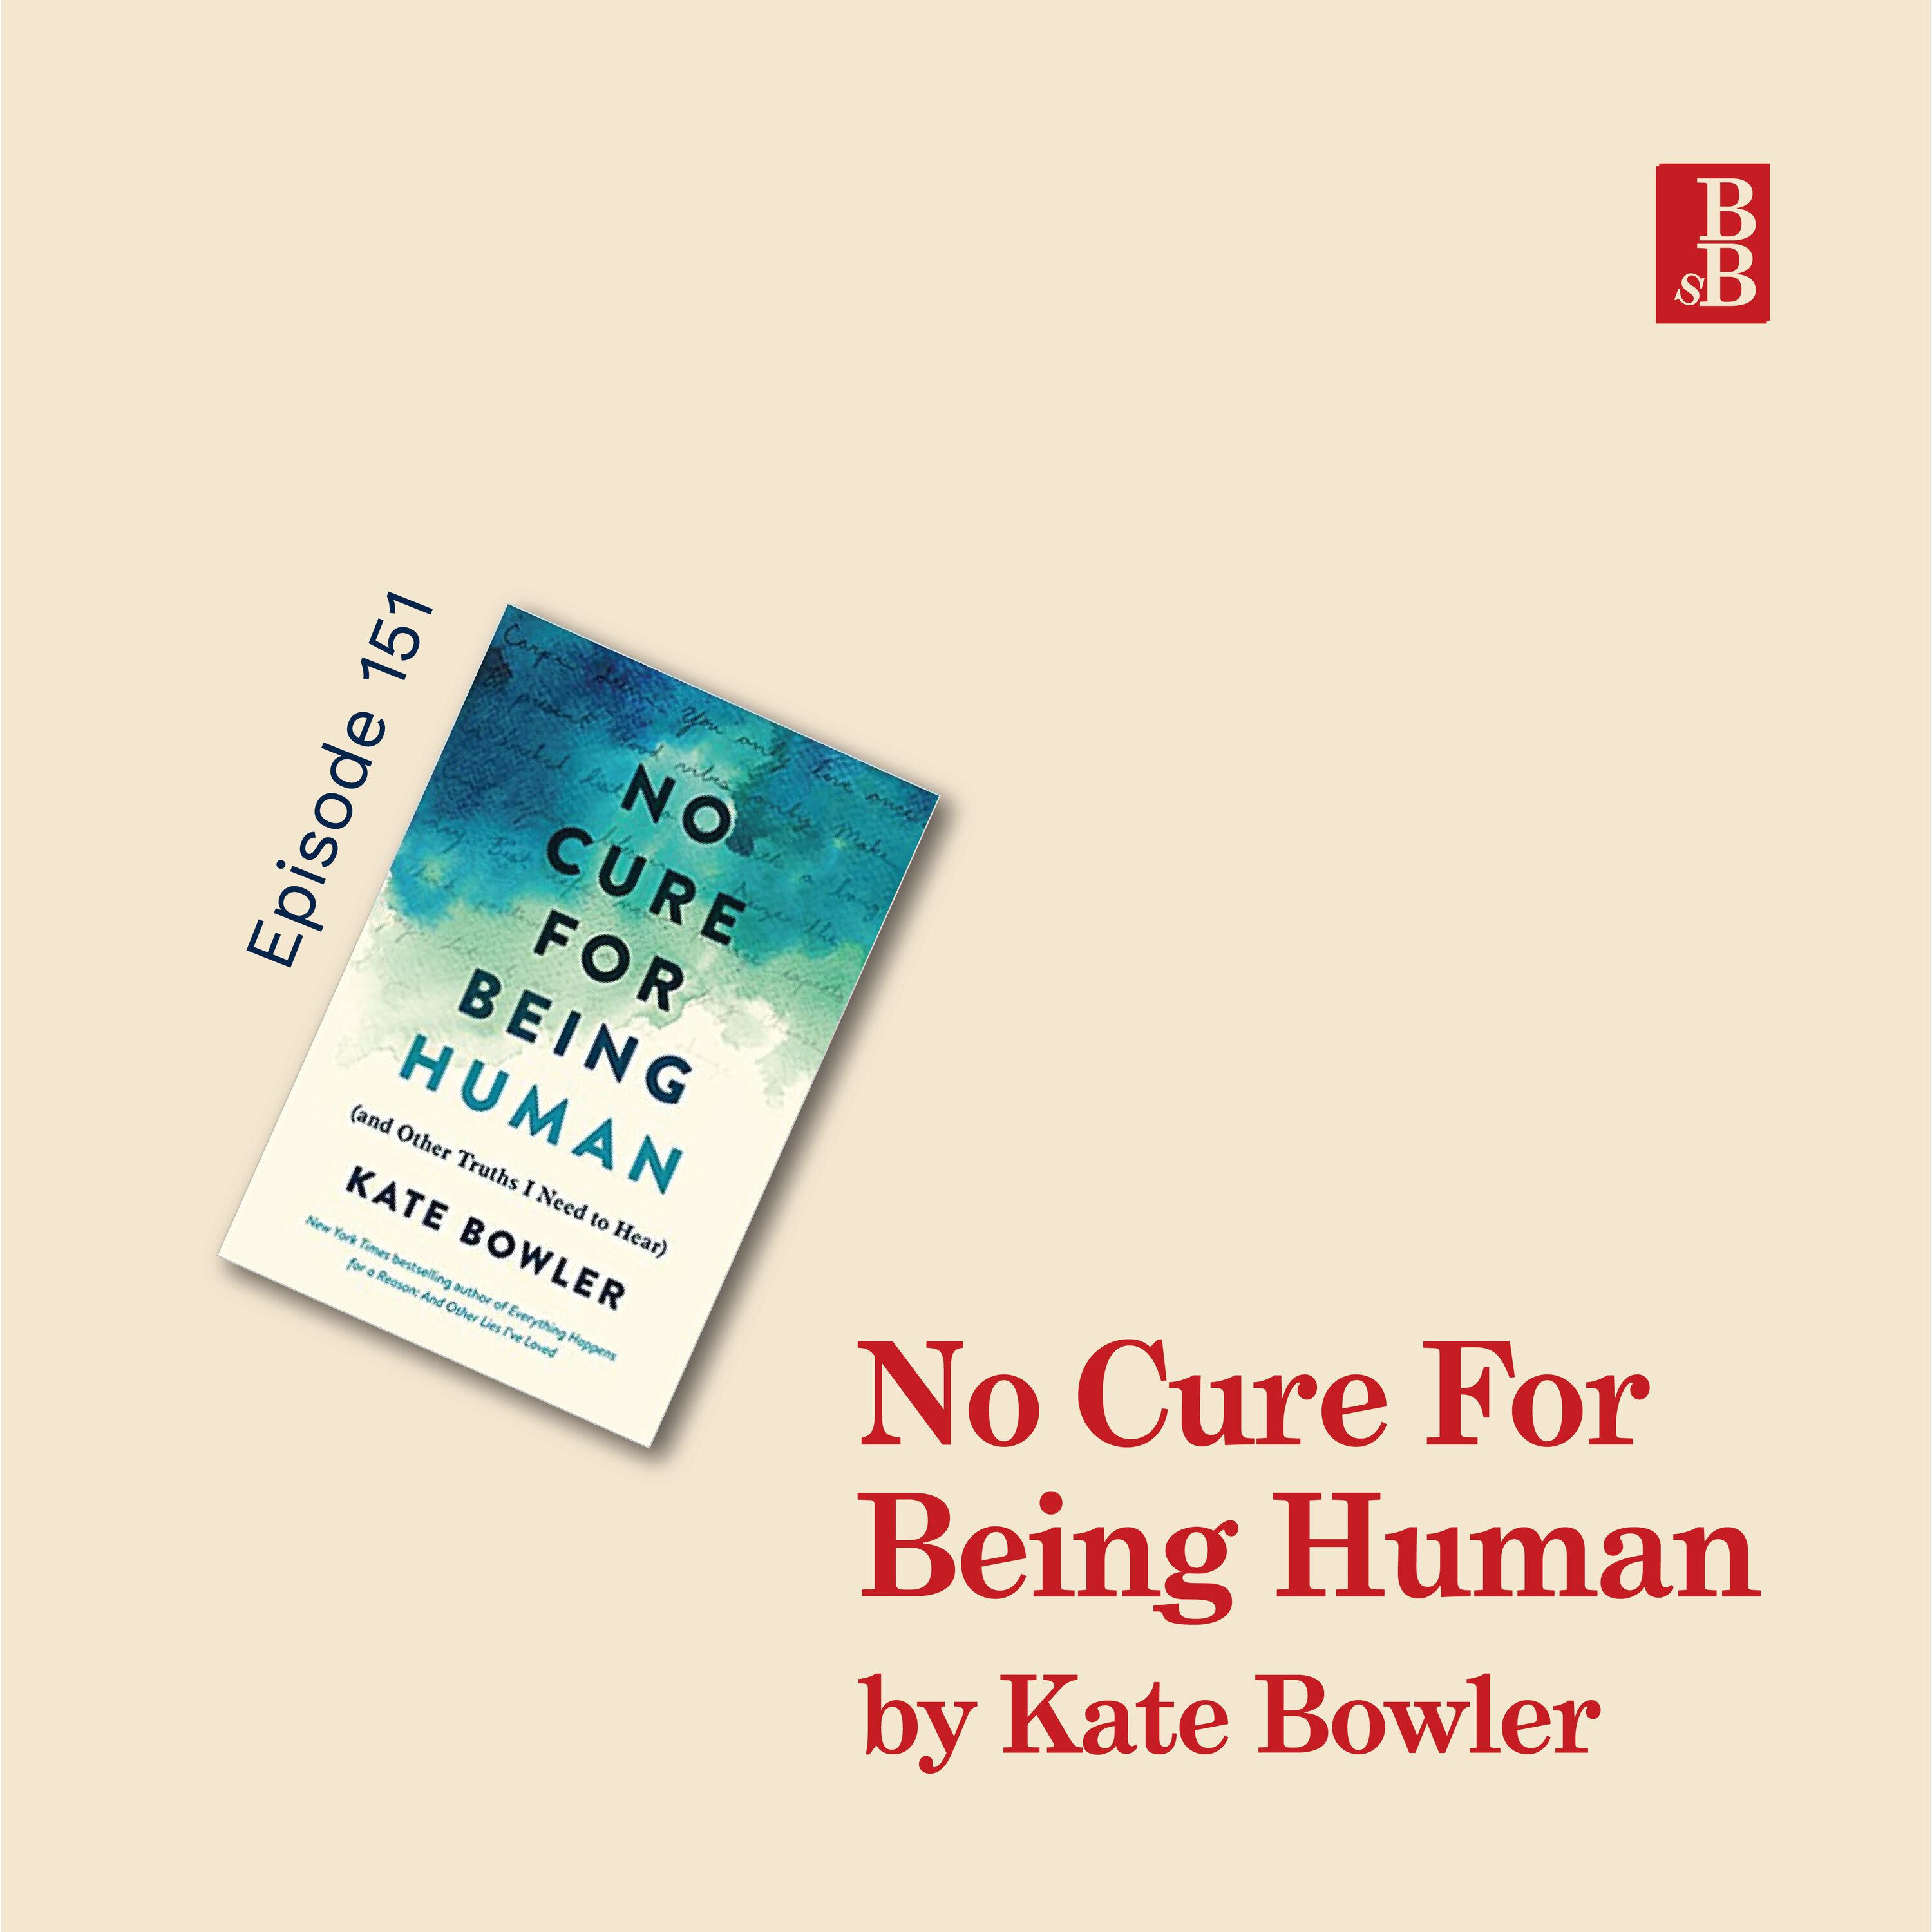 No Cure For Being Human by Kate Bowler: how to find out what really matters in life Image